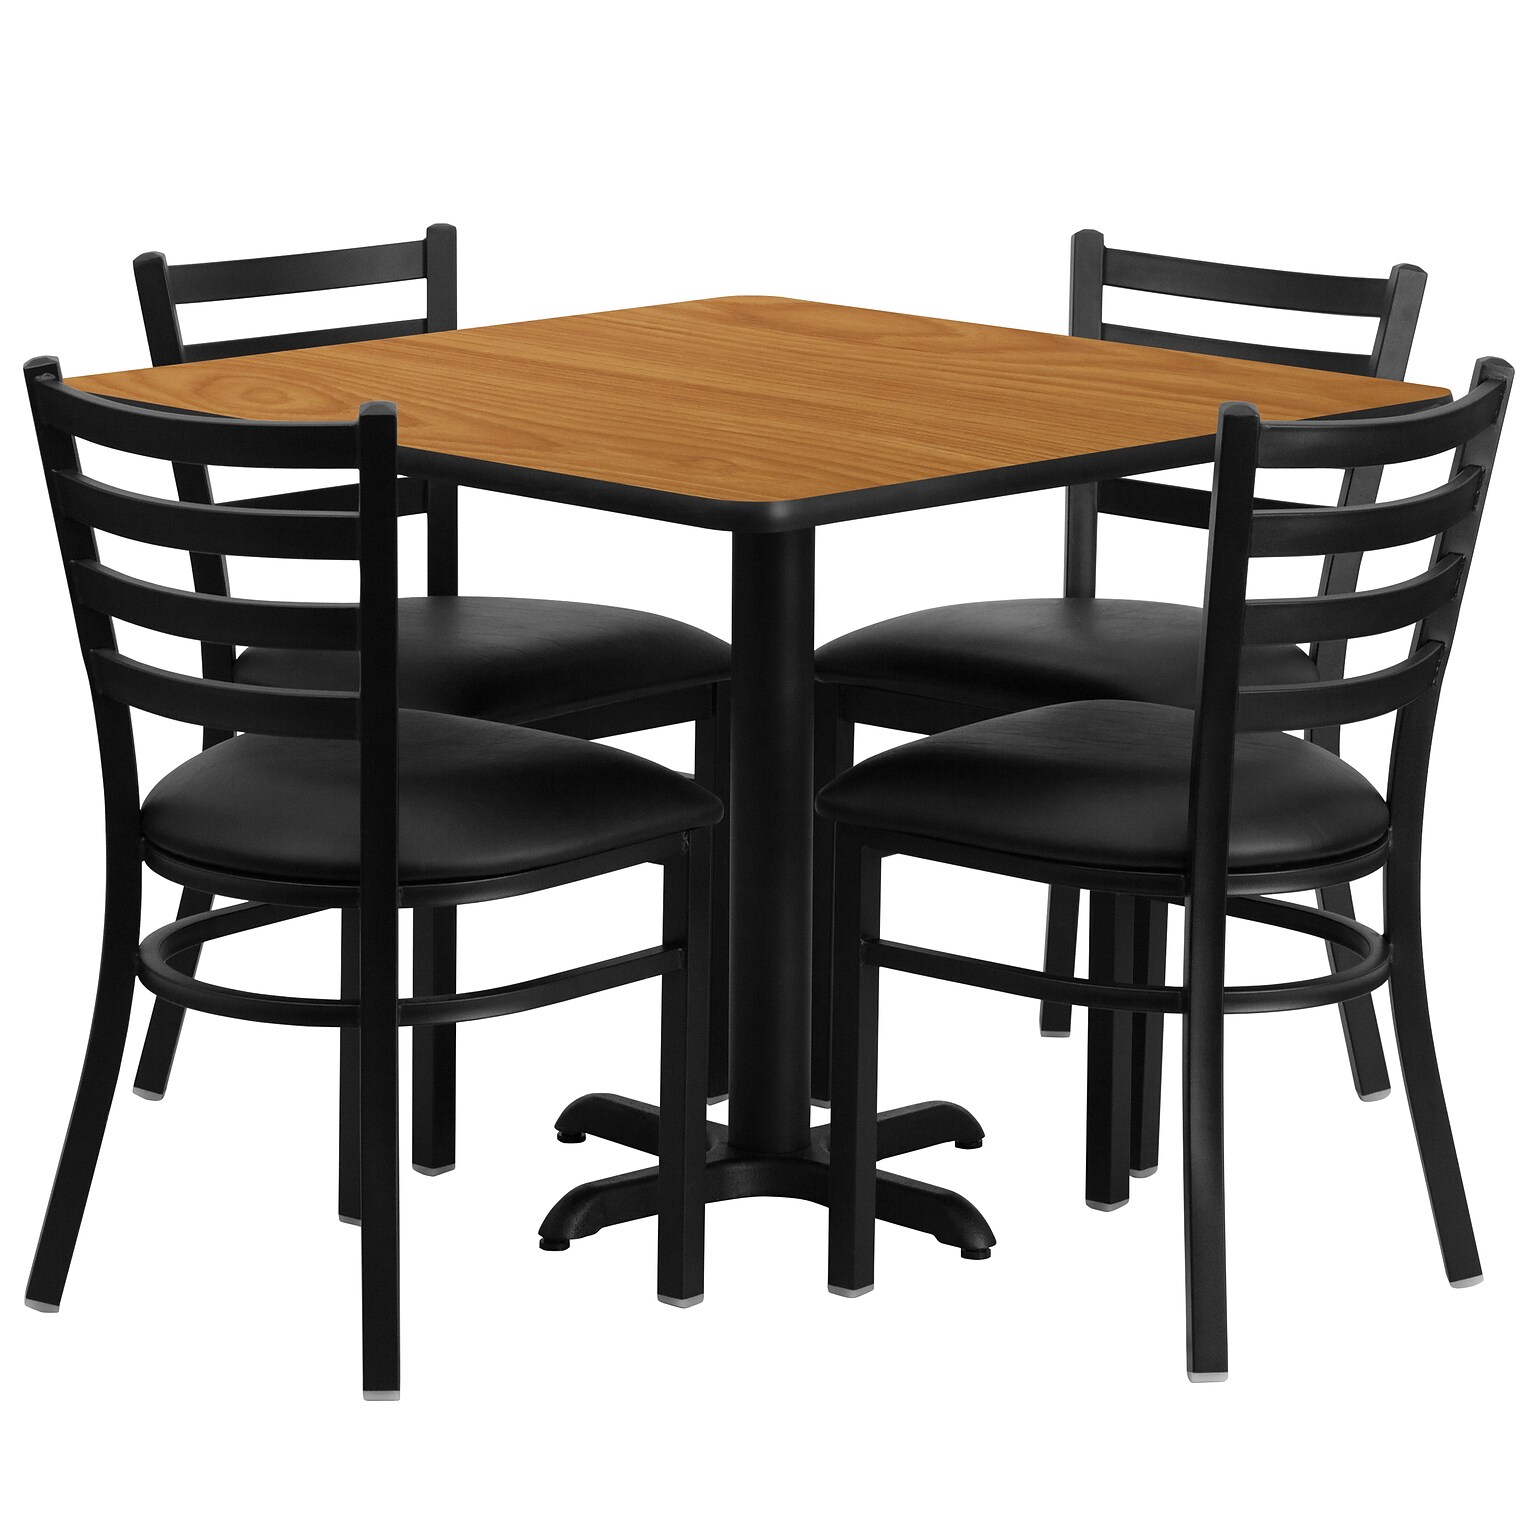 Flash Furniture 36 Square Natural Laminate Table Set With 4 Ladder Back Metal Chairs, Black (HDBF1015)